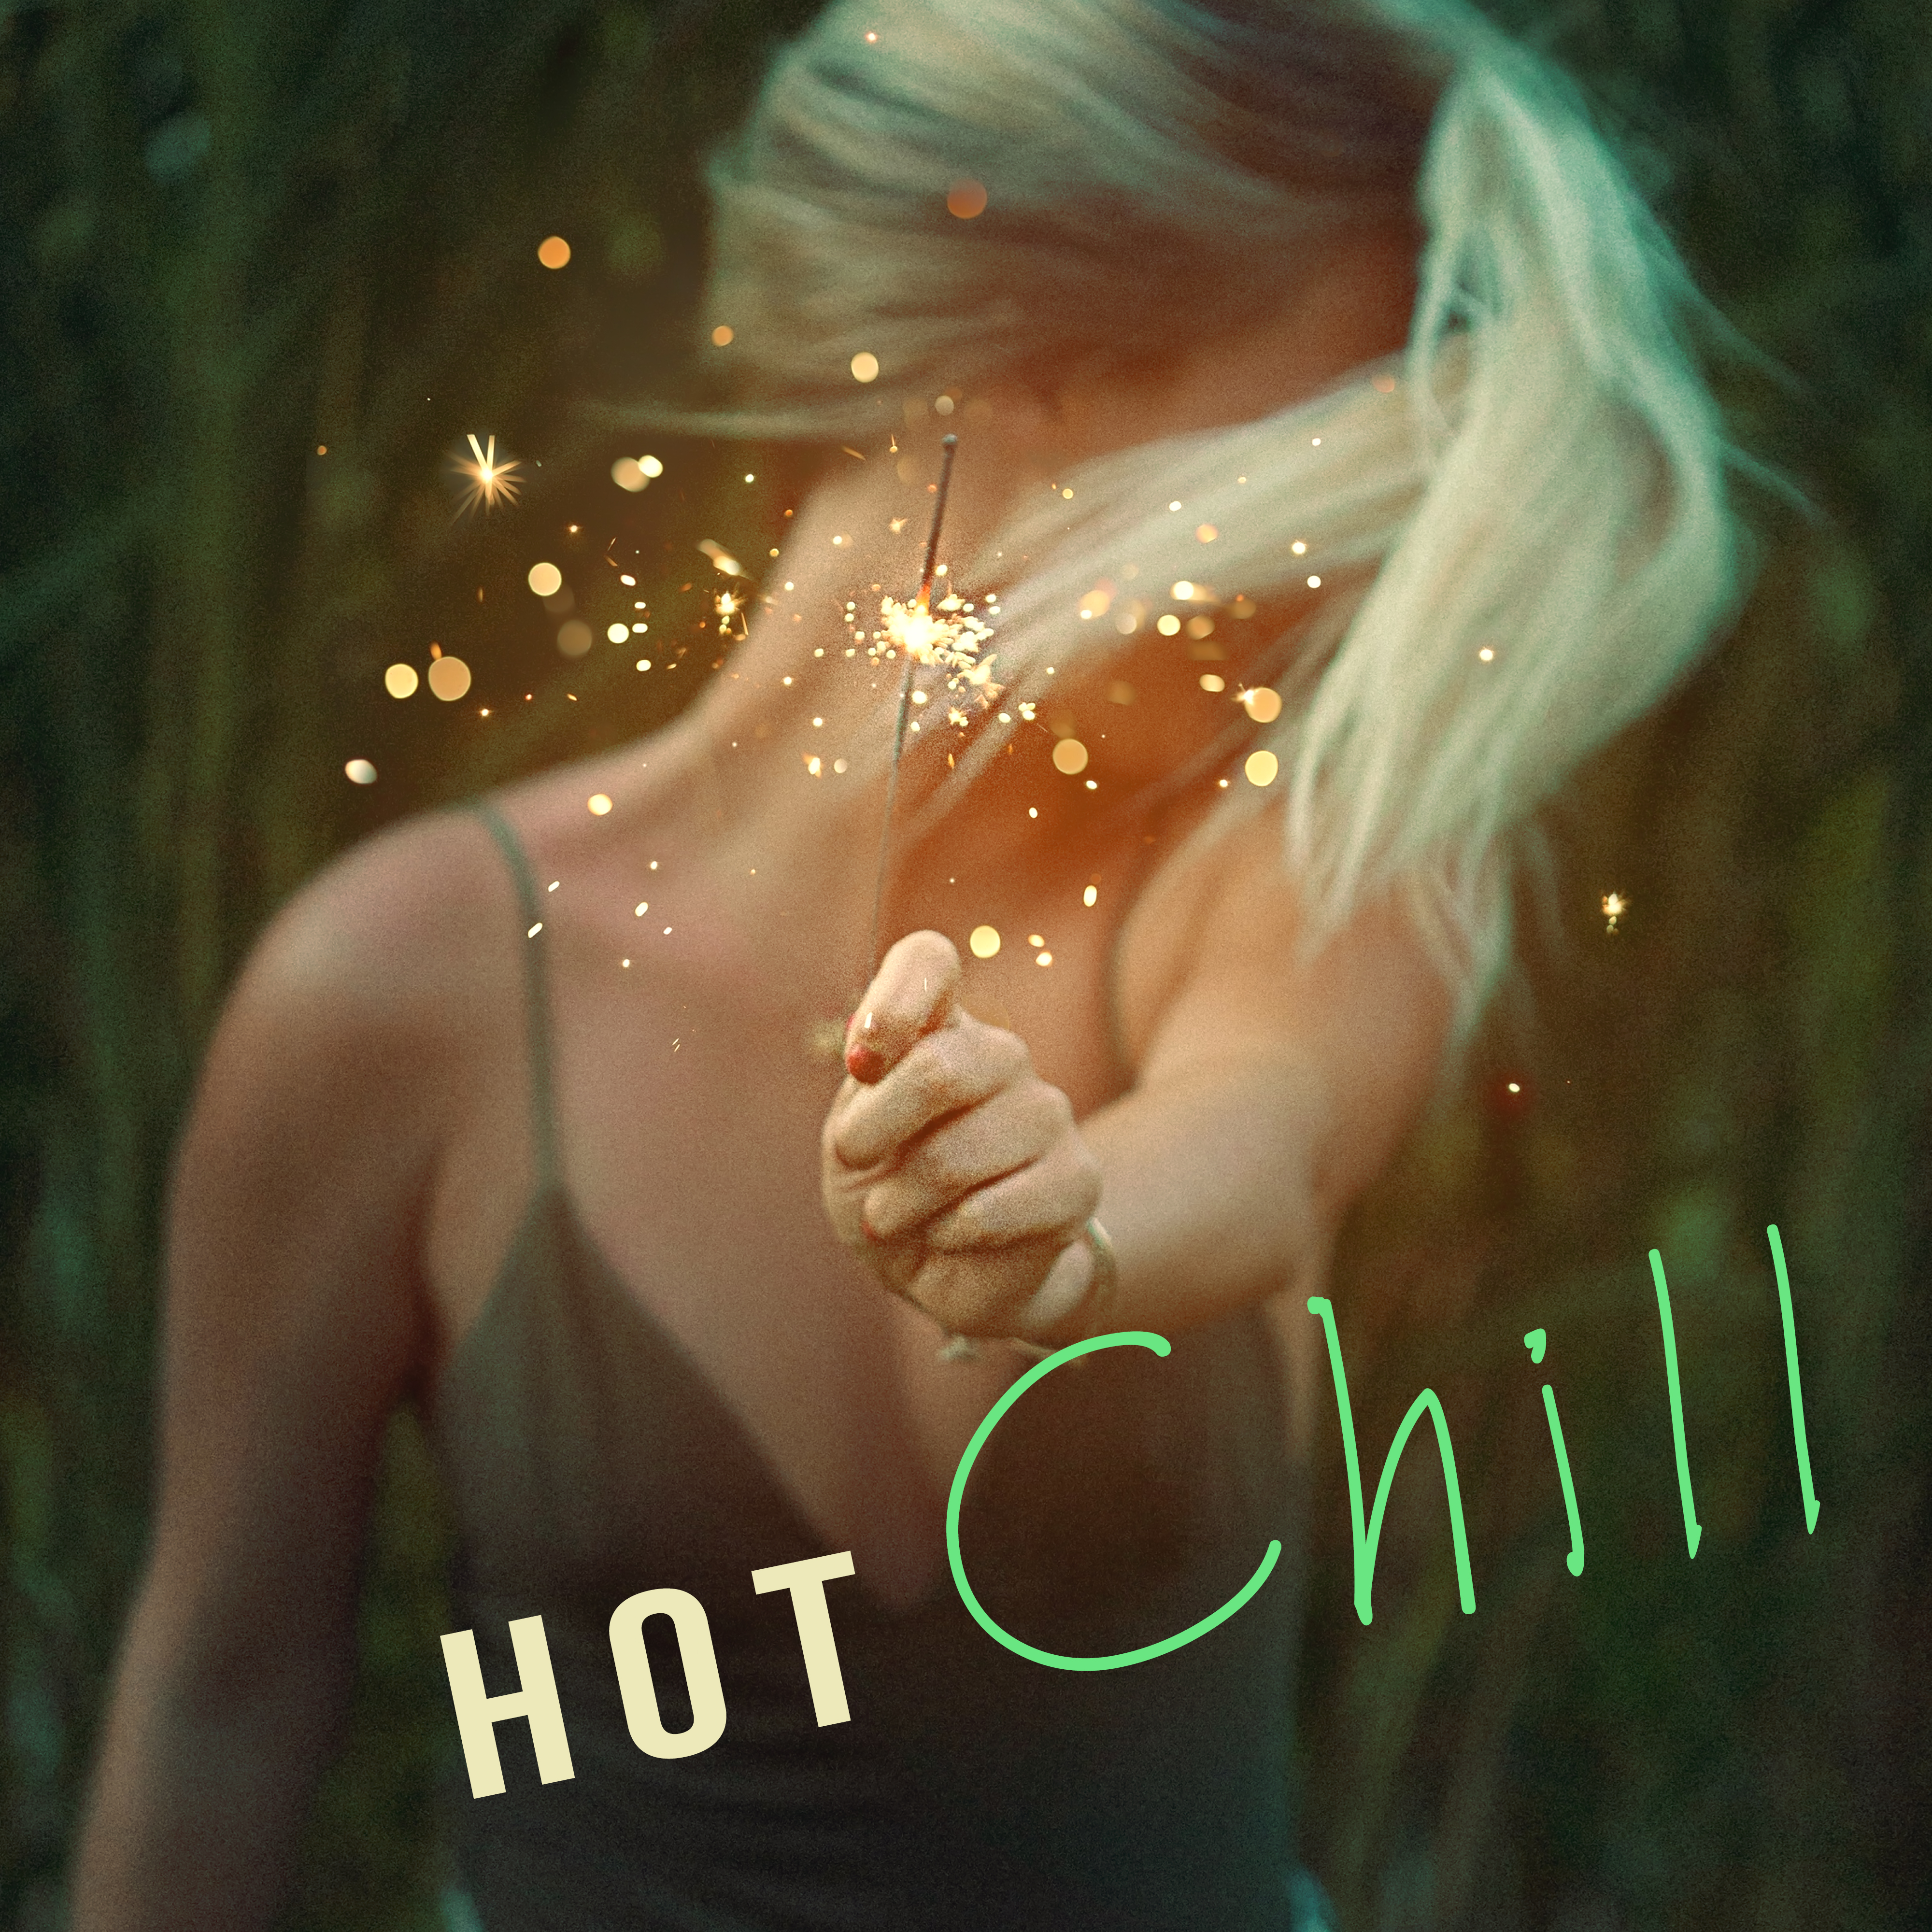 Hot Chill – Spa Lounge, Best Chill Out Music, Easy Listening Chill, Lounge Tunes, Chillout Hits